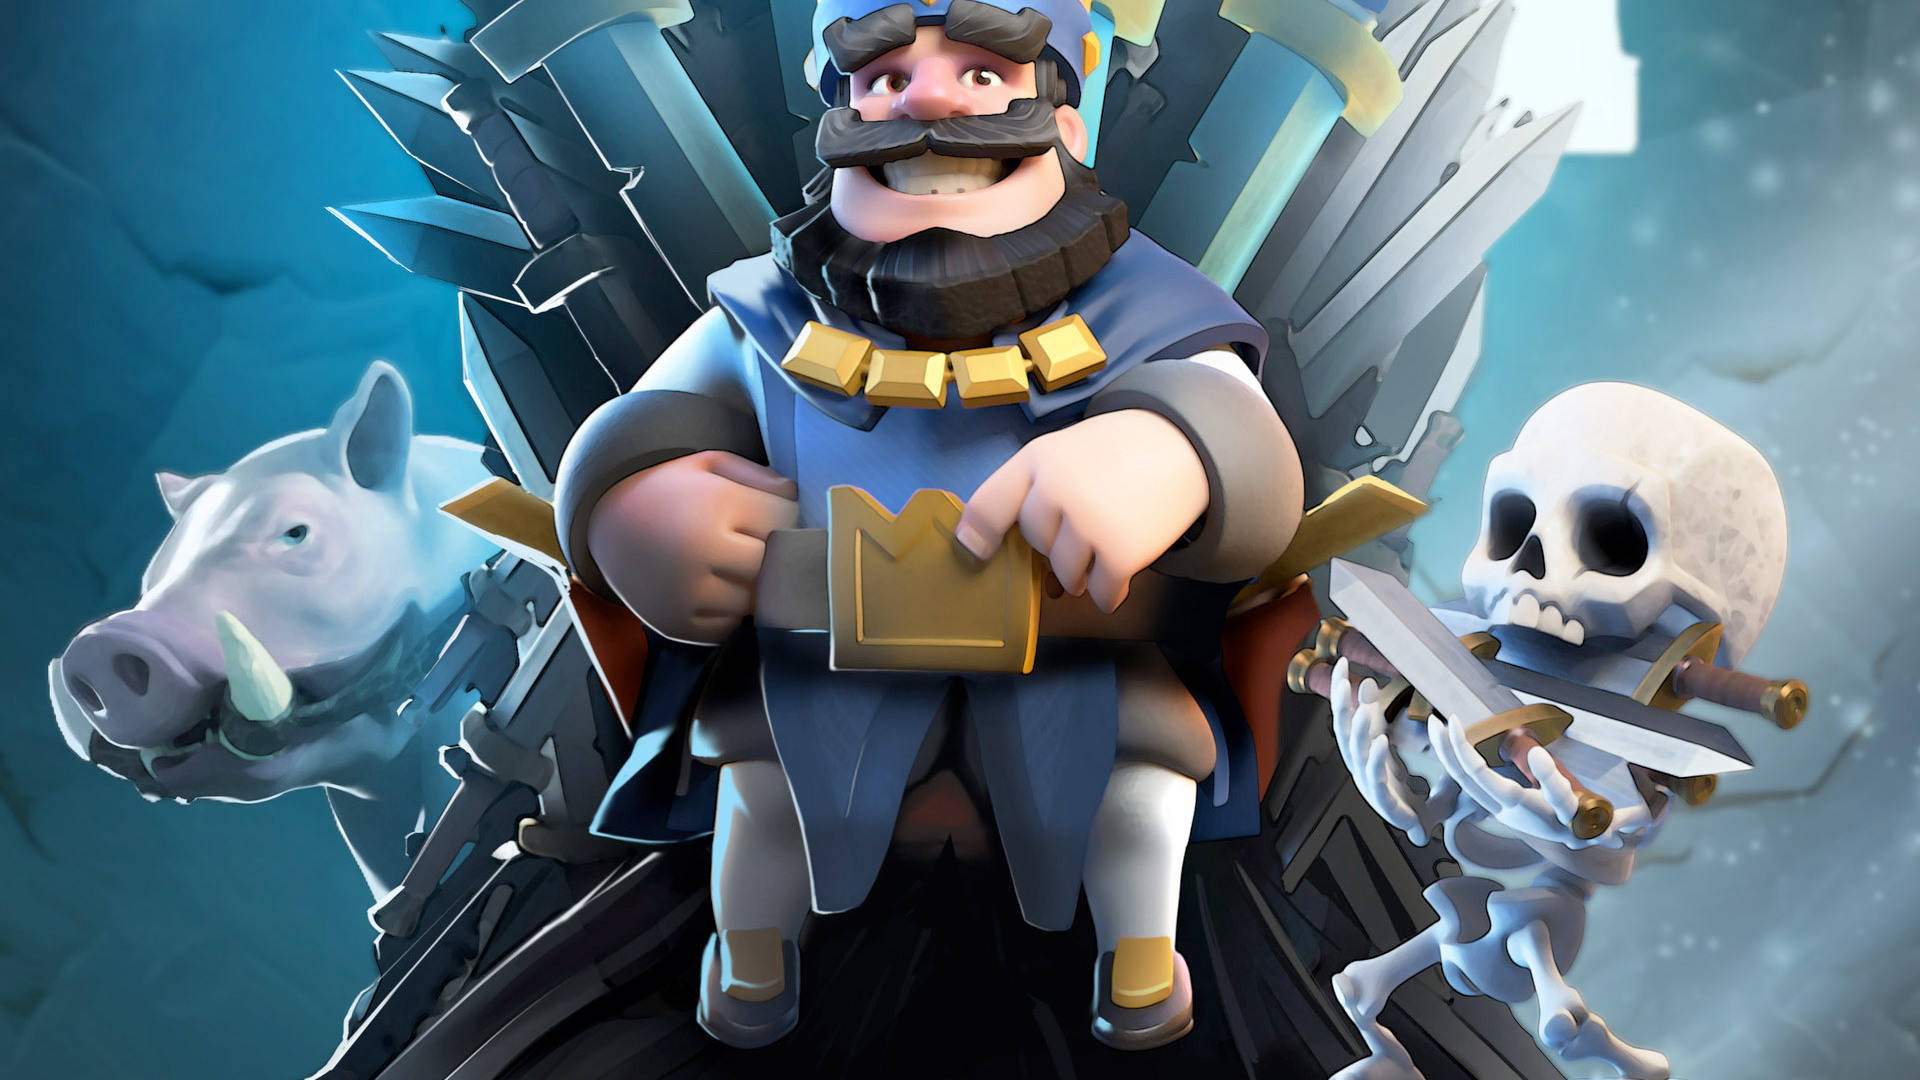 Top 999+ Clash Royale Wallpapers Full HD, 4K✅Free to Use